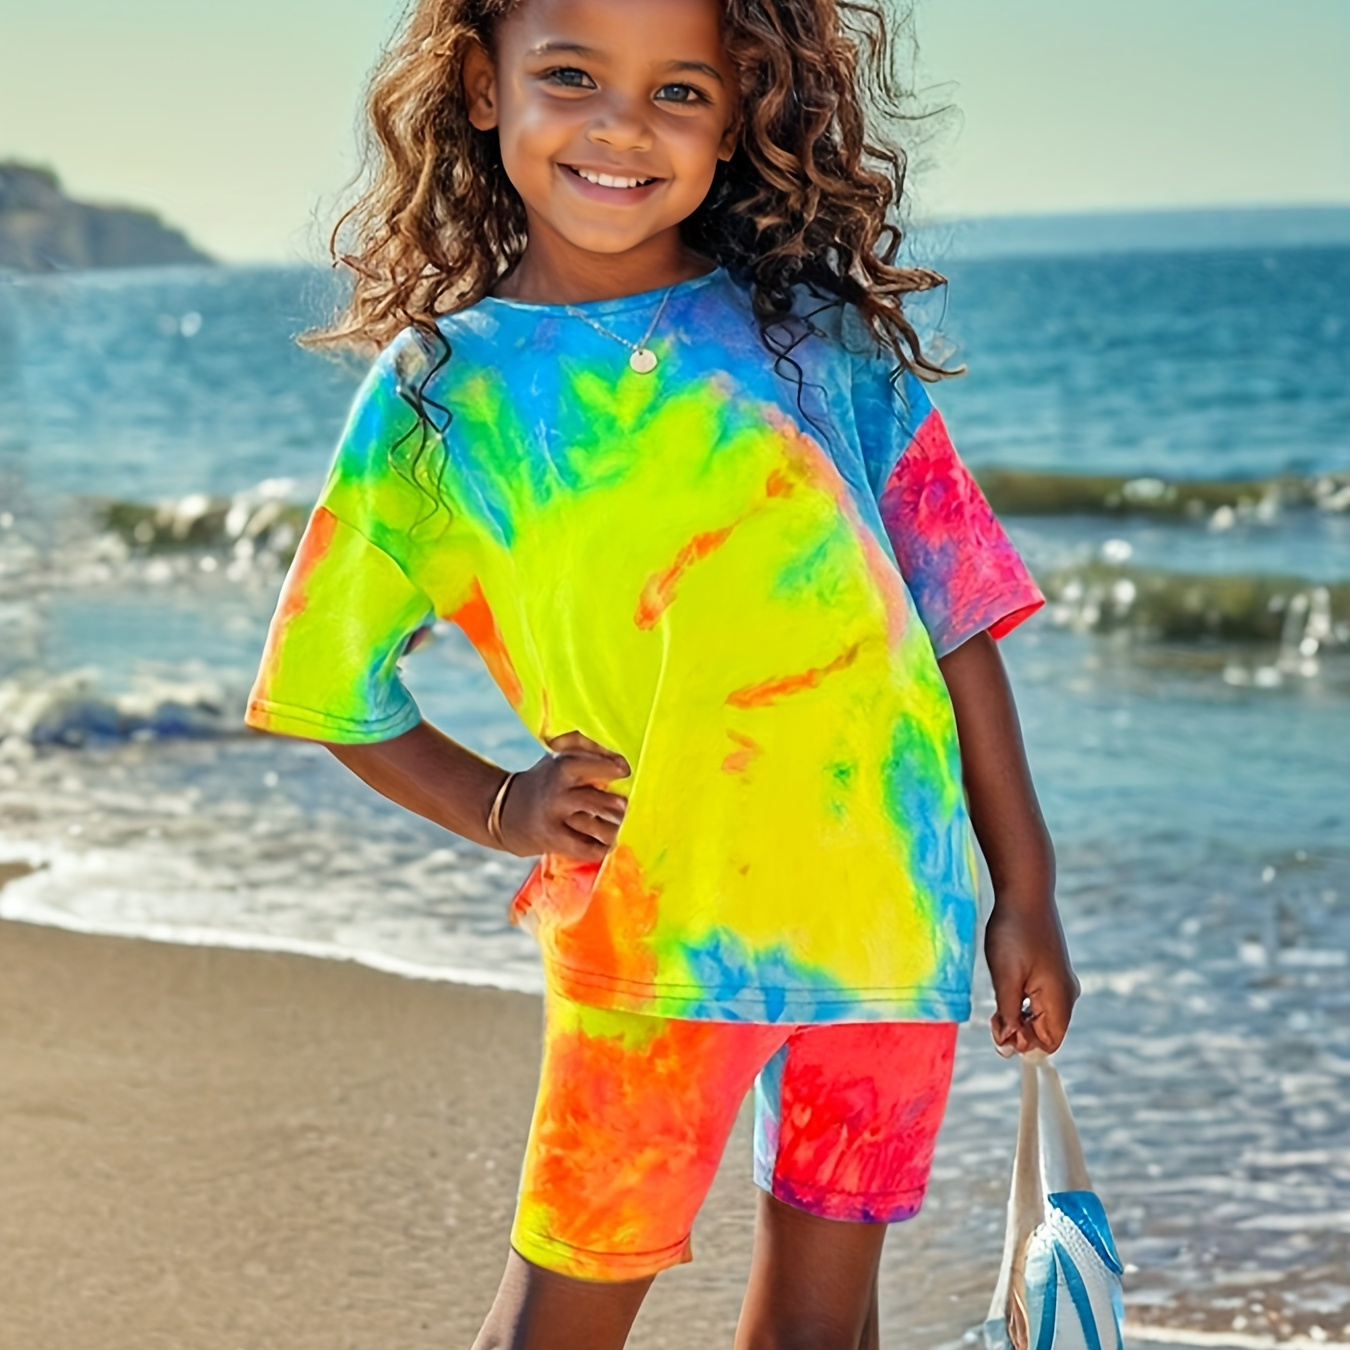 

Tie Dye Outfit 2pcs, Short Sleeve T-shirt + Shorts Girls Outfit 1 Set - Ideal For Summer & Casual Outings